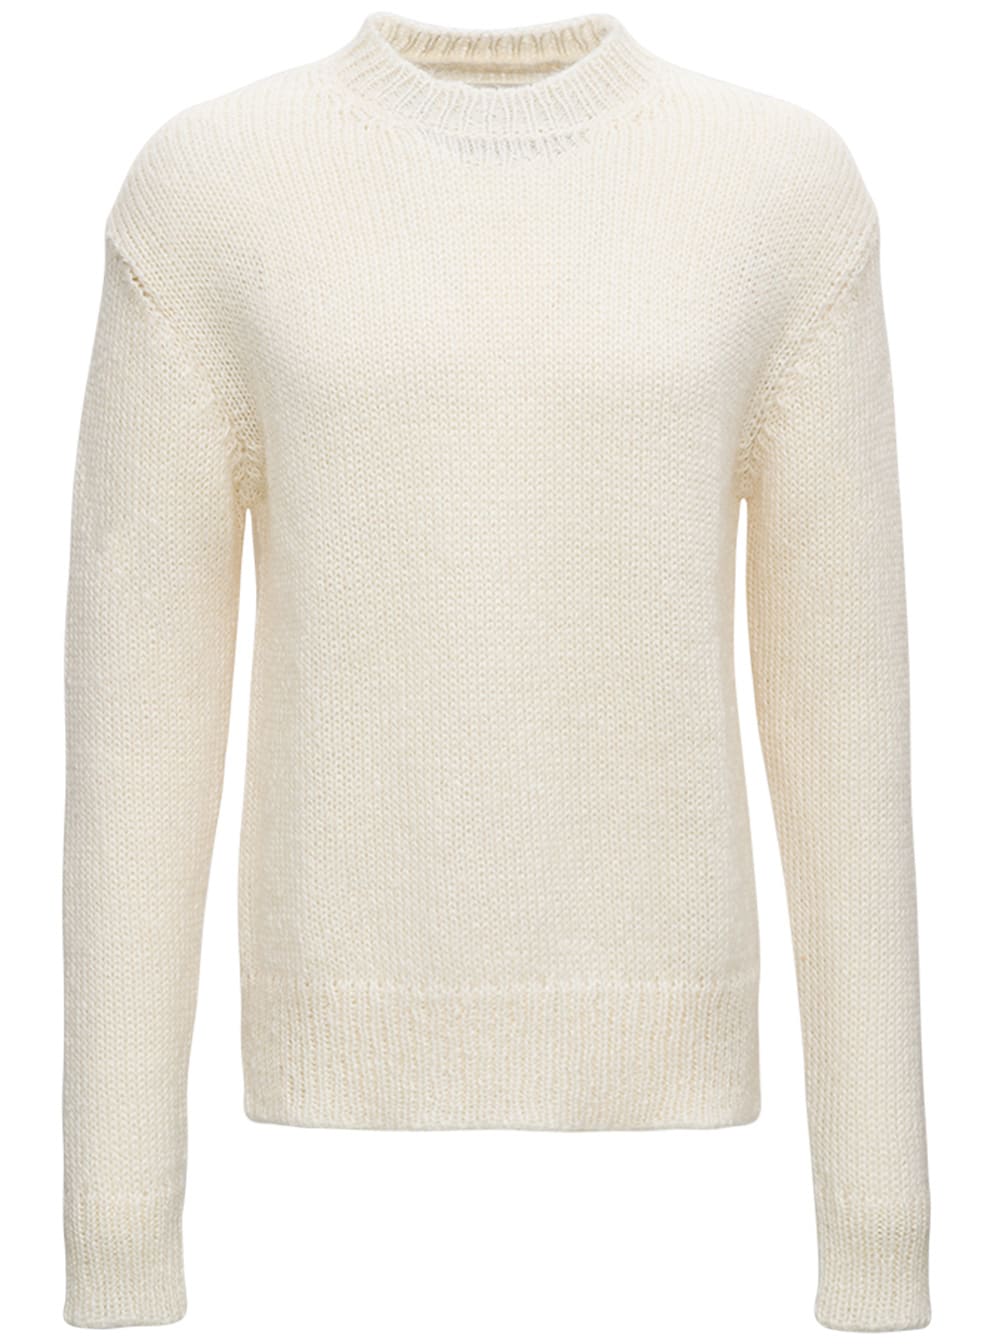 Jil Sander Ivory-colored Silk And Mohair Sweater